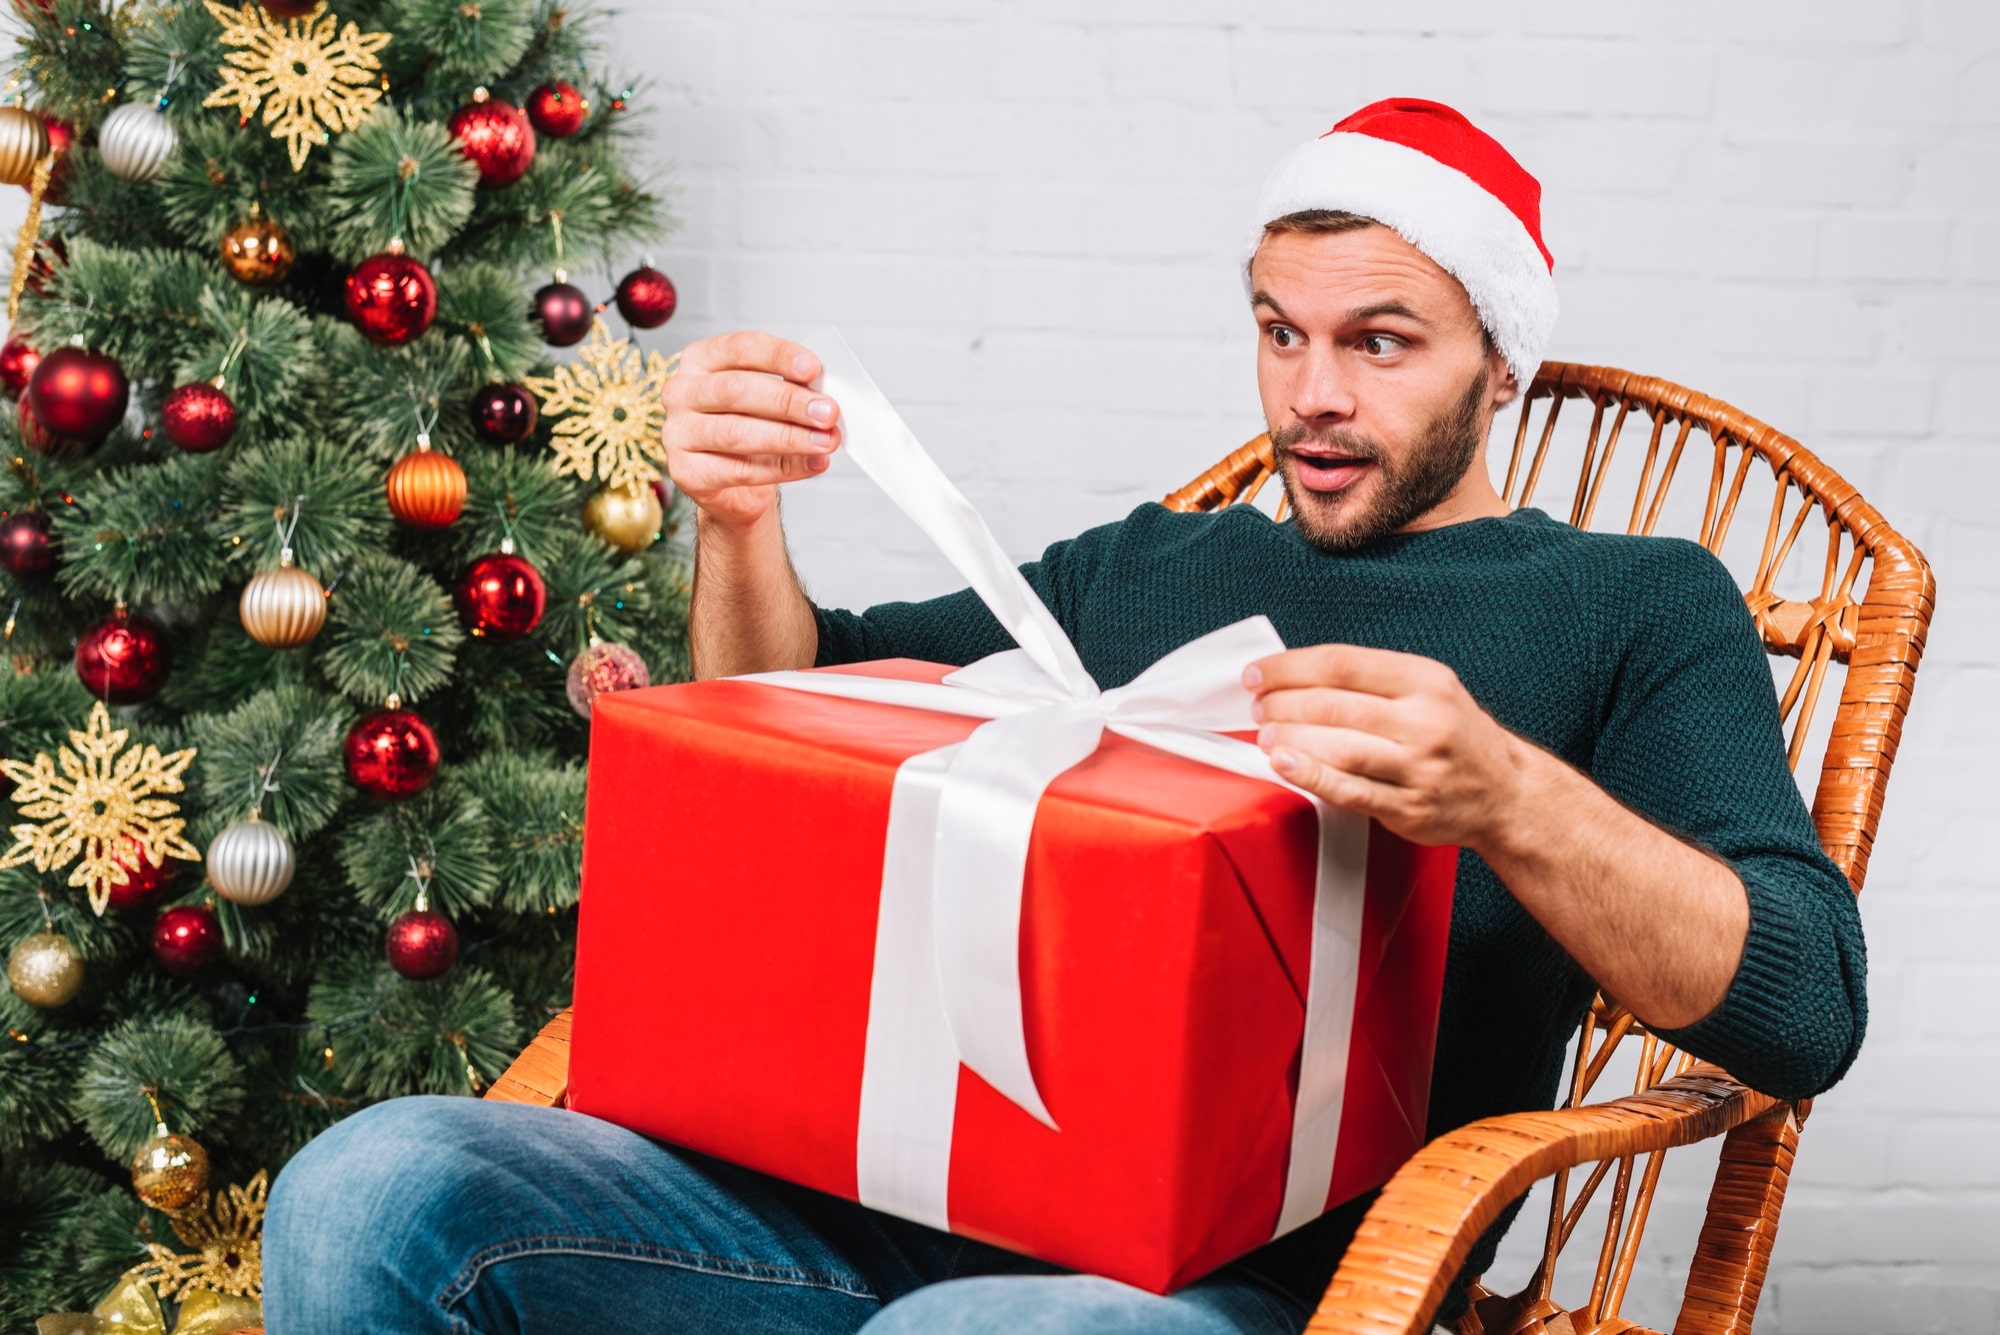 50+ Christmas Gifts For Him That Will Make Him Feel Extra Special